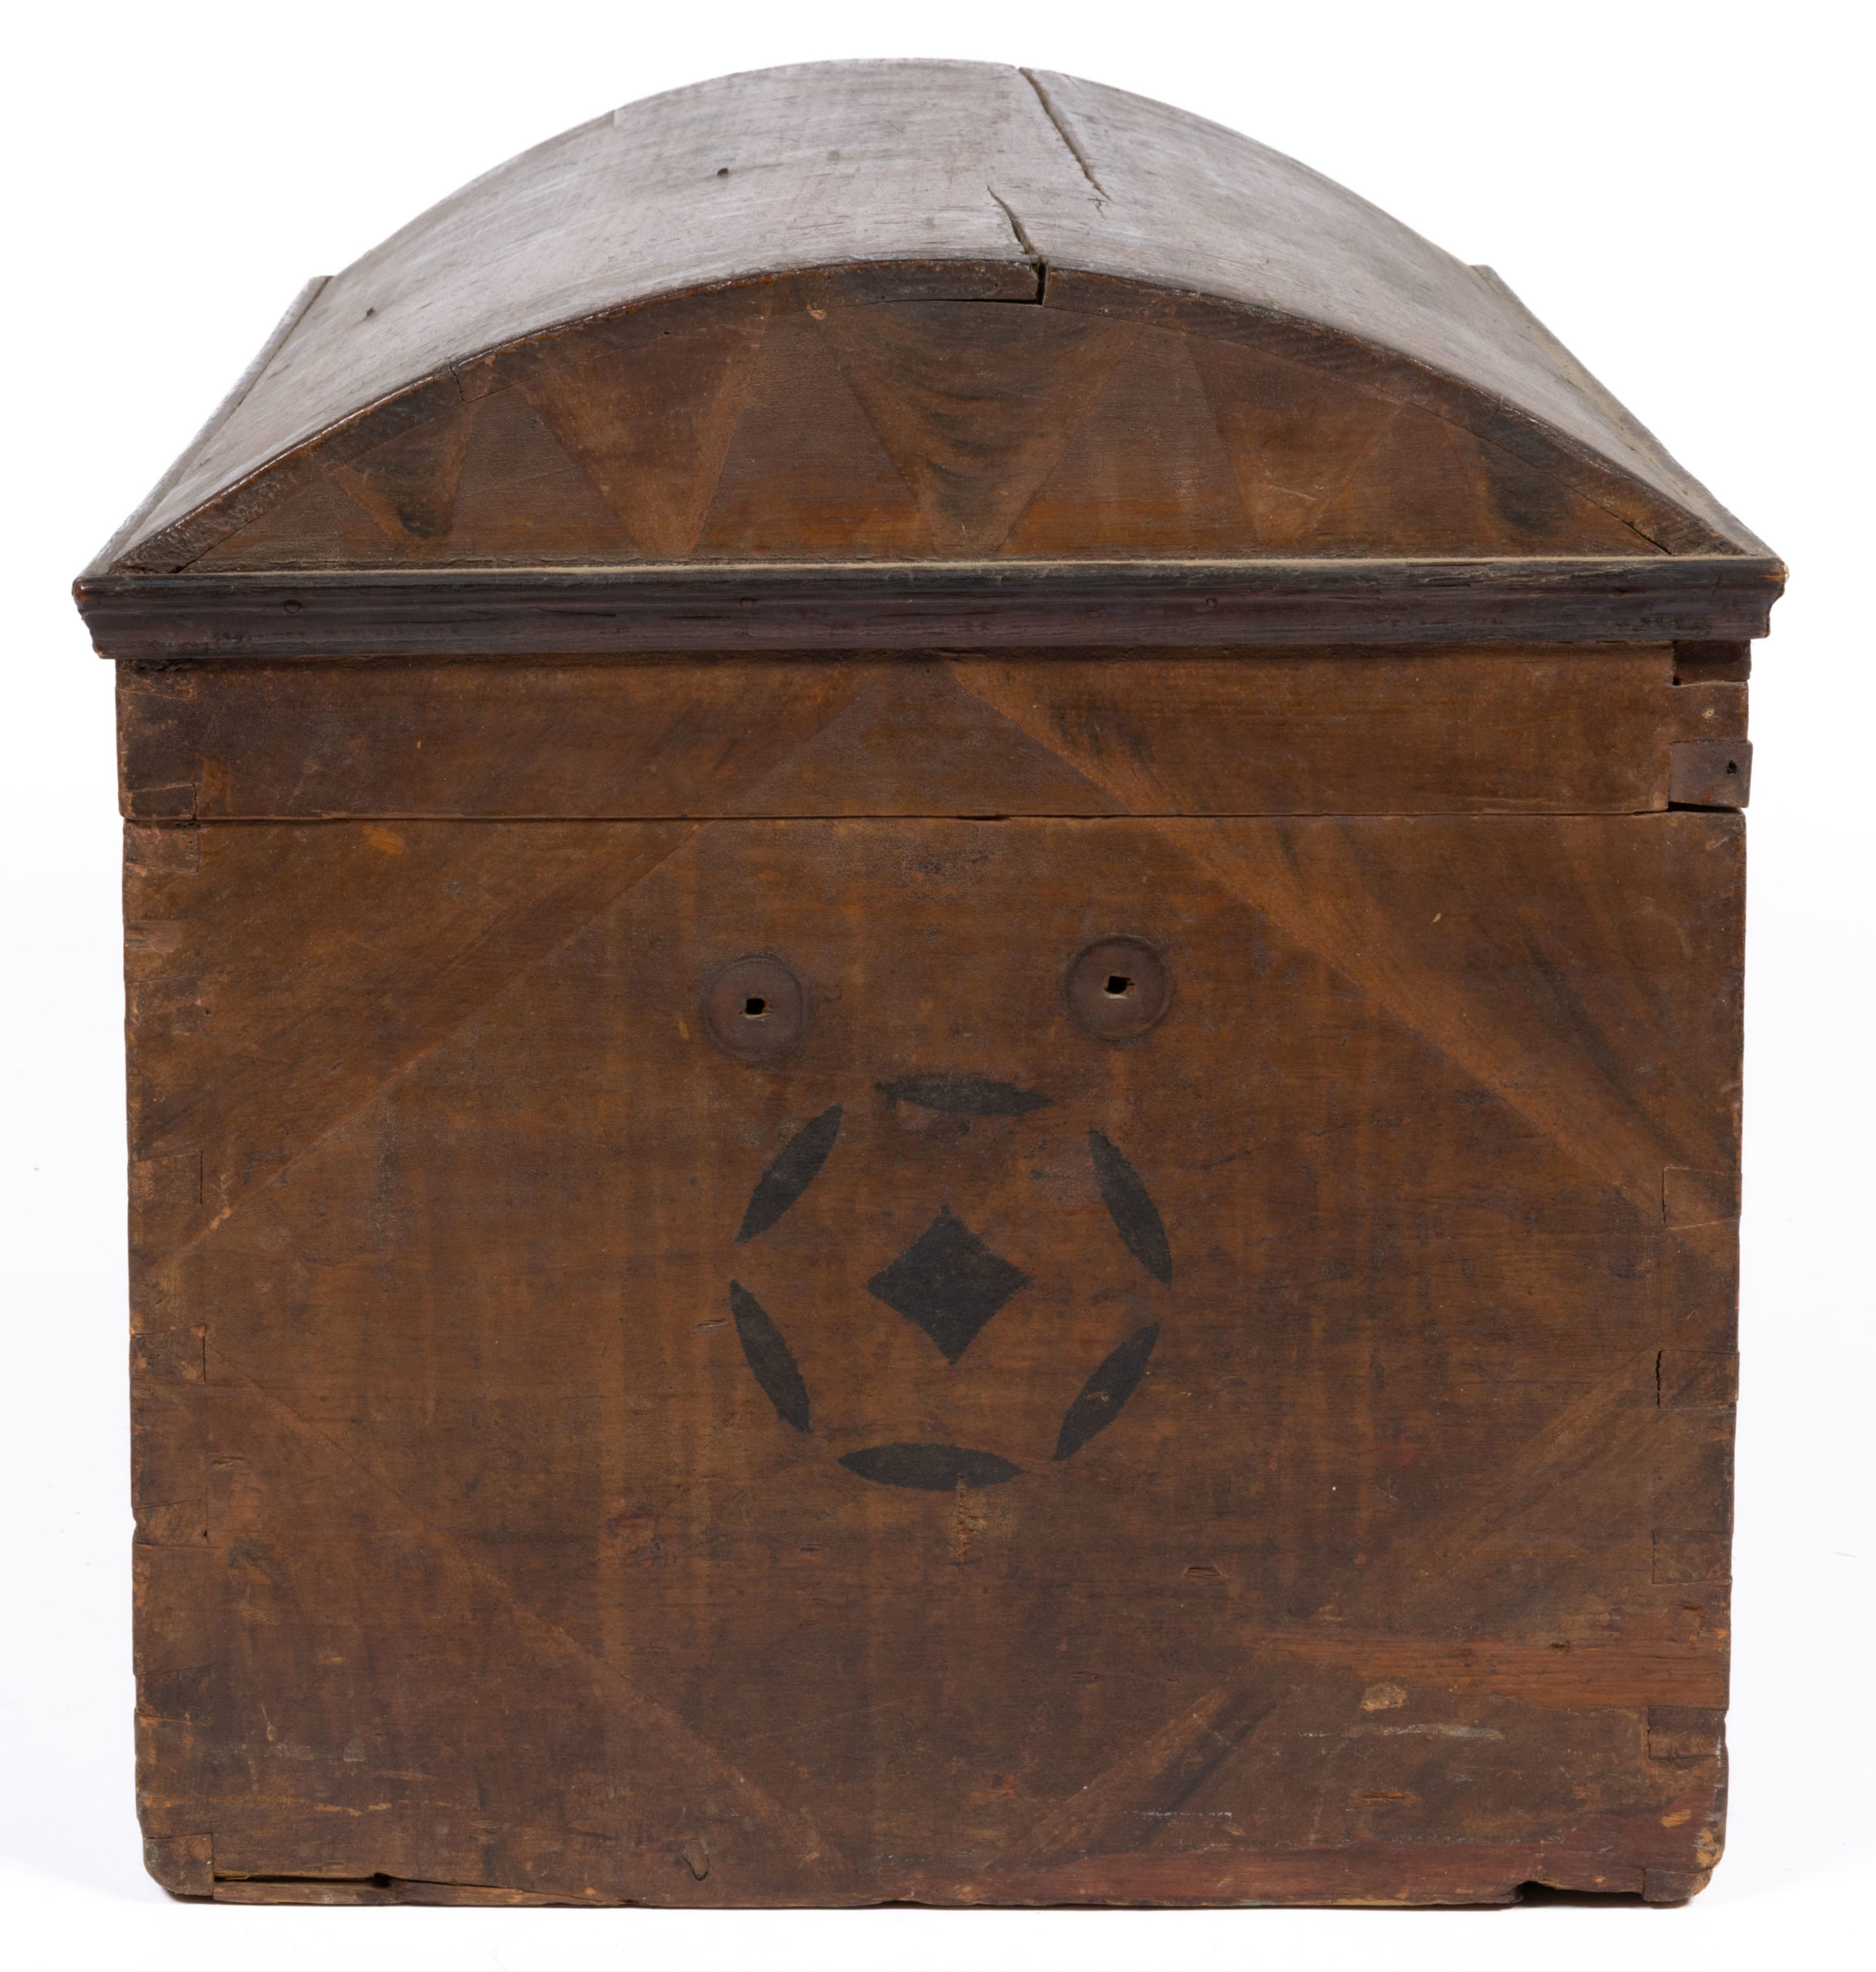 NEW ENGLAND PAINT-DECORATED DOME-TOP BOX,